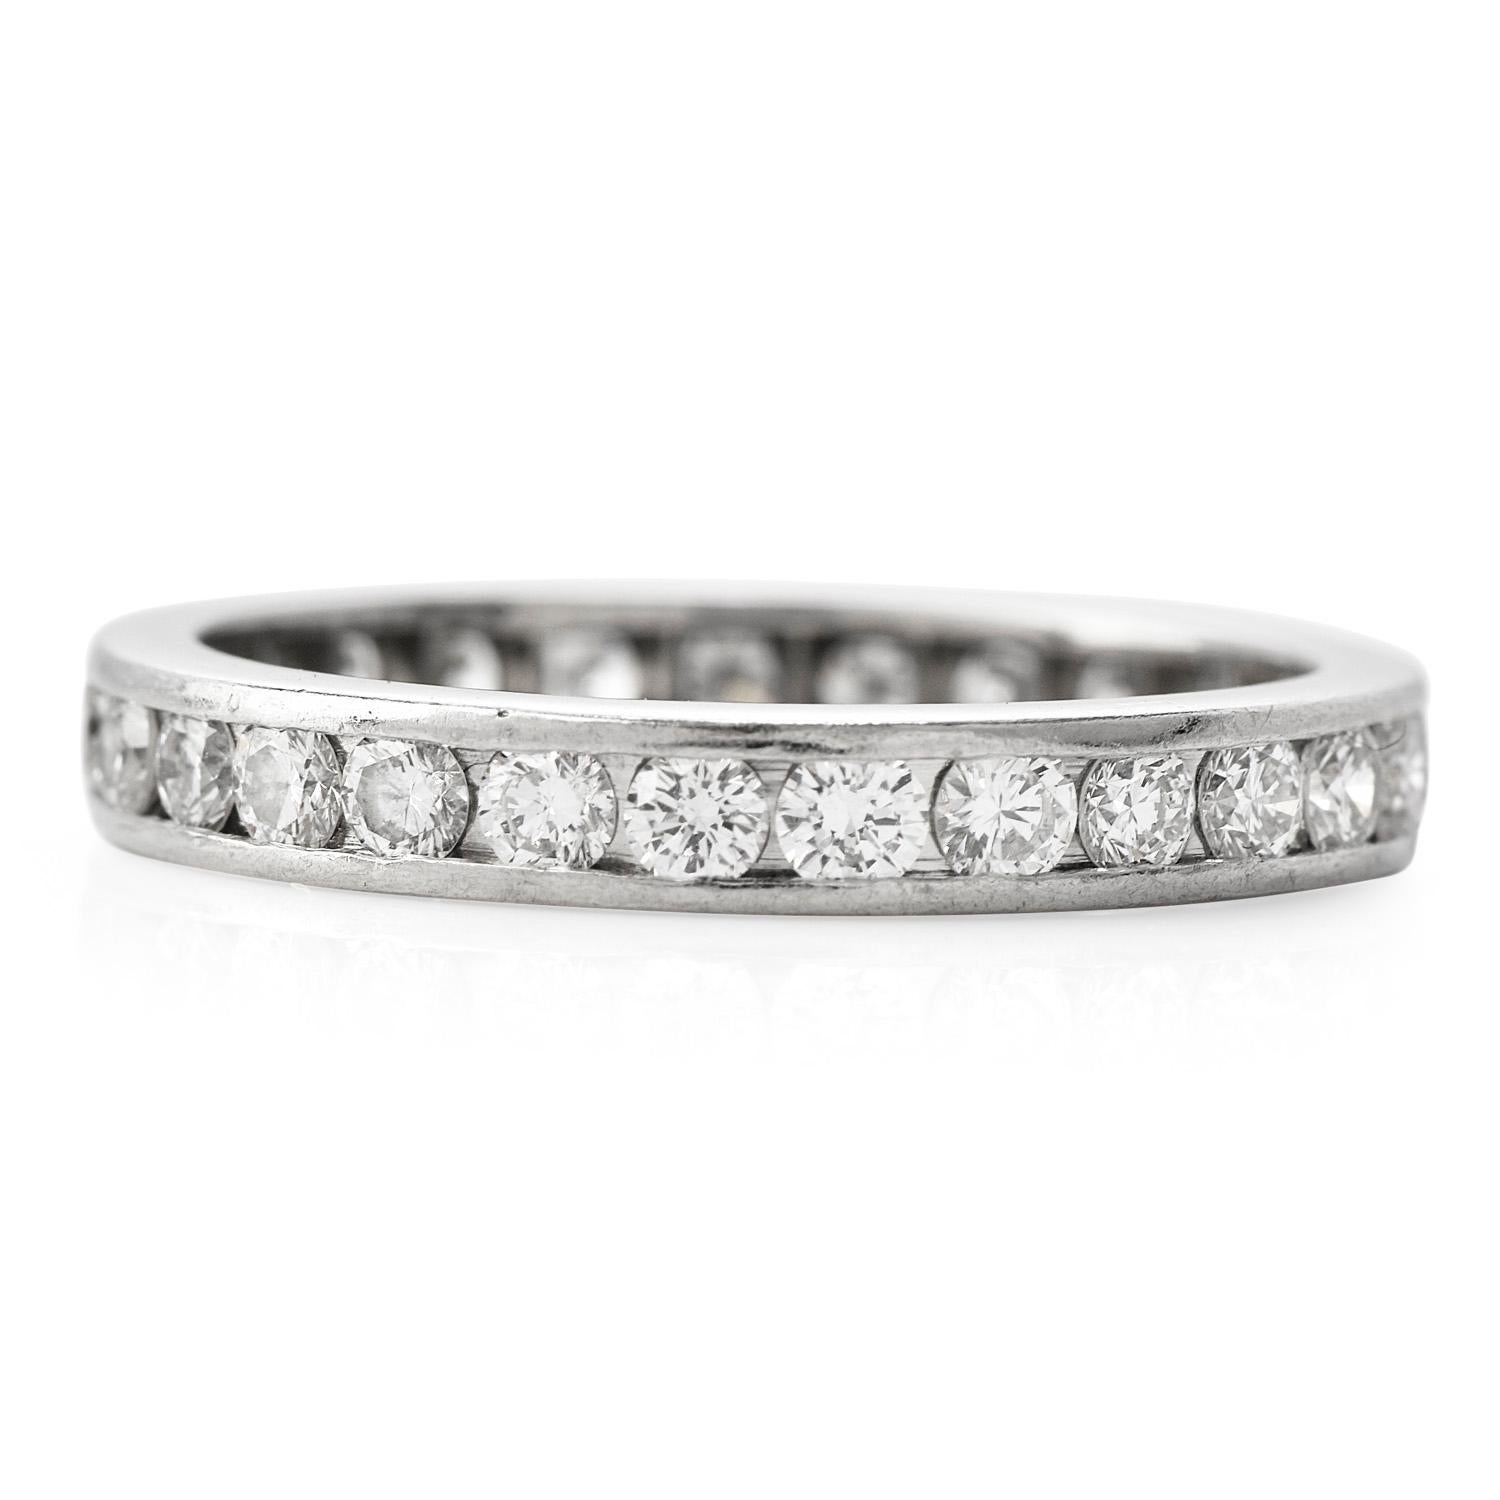  Tiffany & Co Diamond Platinum Designer Eternity Band Ring 

Classic Elegance. These are two words that characterize this exquisite Tiffany & Co Diamond Platinum Designer Eternity Band Ring 

Expertly crafted in solid Platinum, compose by (28)